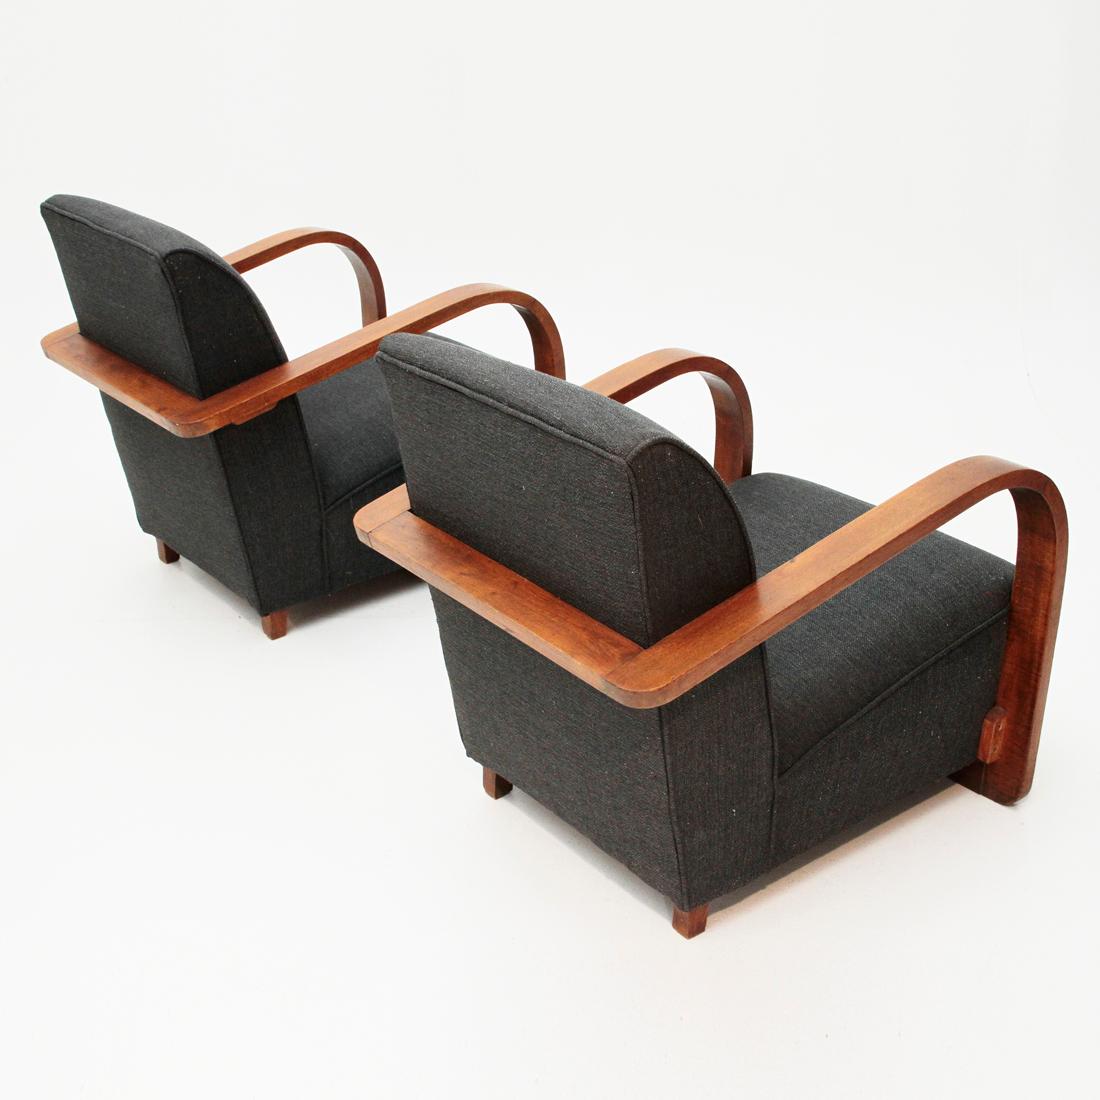 Mid-20th Century Italian Modernist Lounge Chairs, 1940s, Set of 2